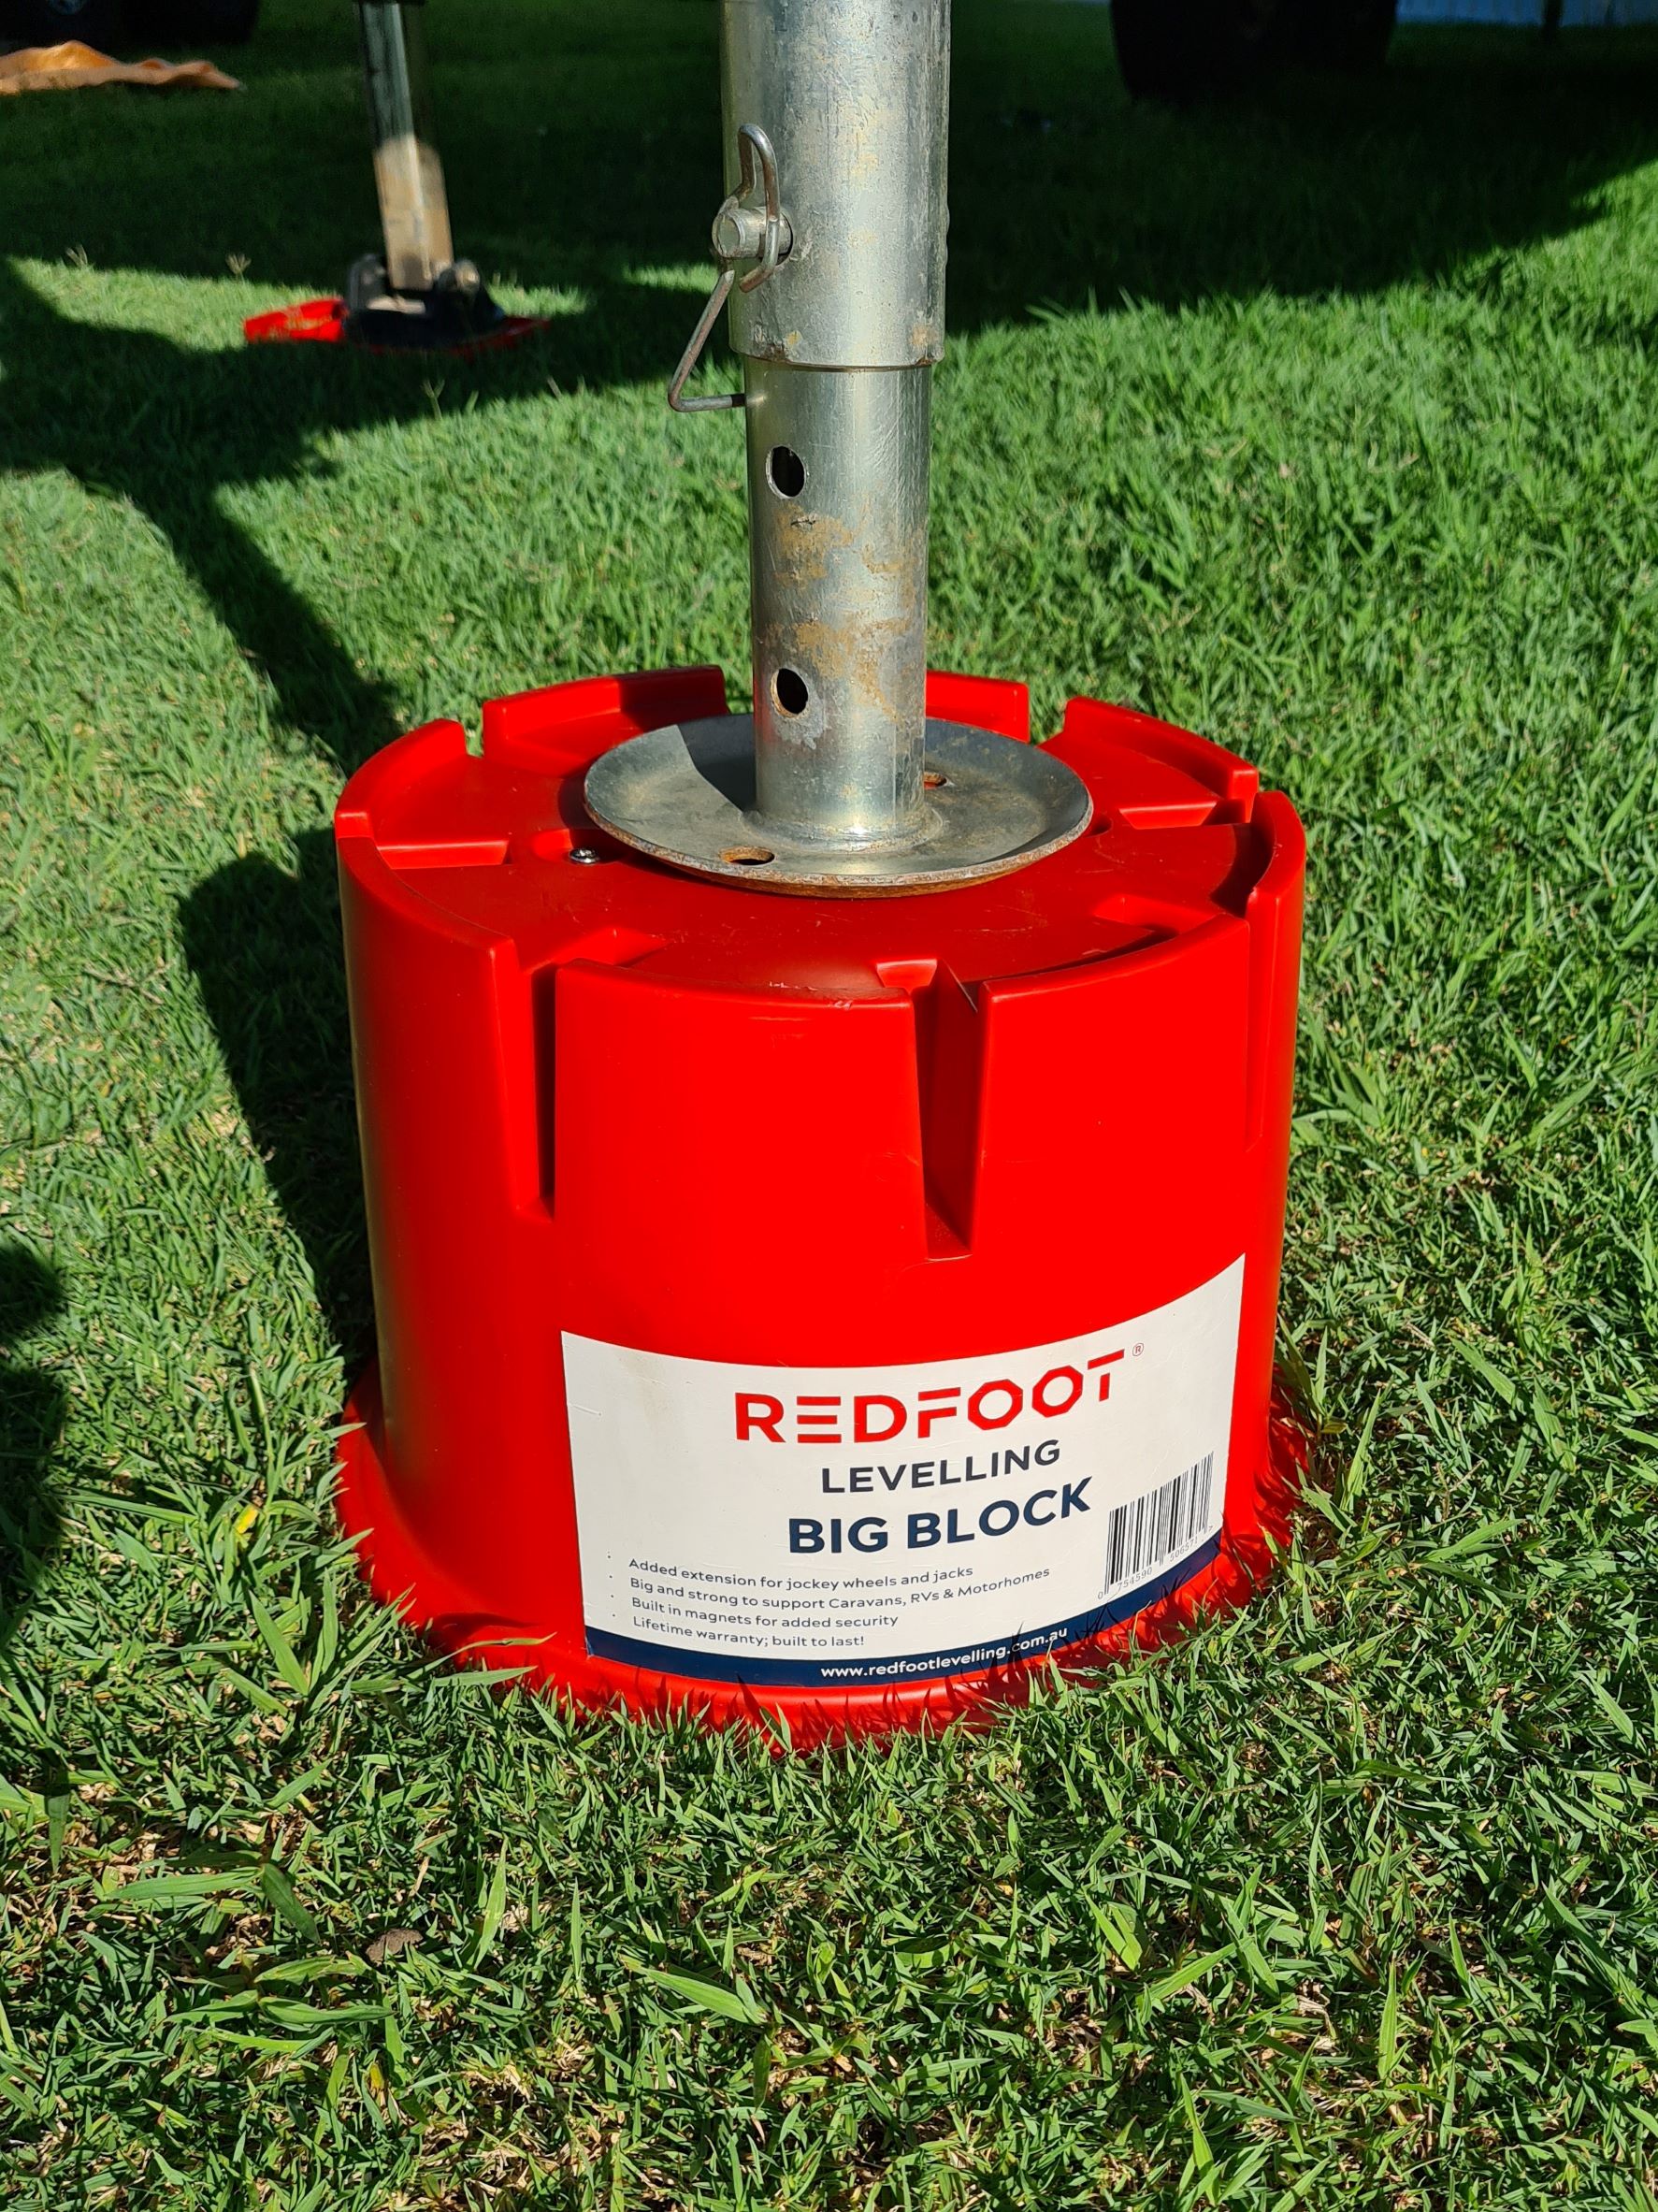 Redfoot Levelling - A red metal pole with a red foot on it.